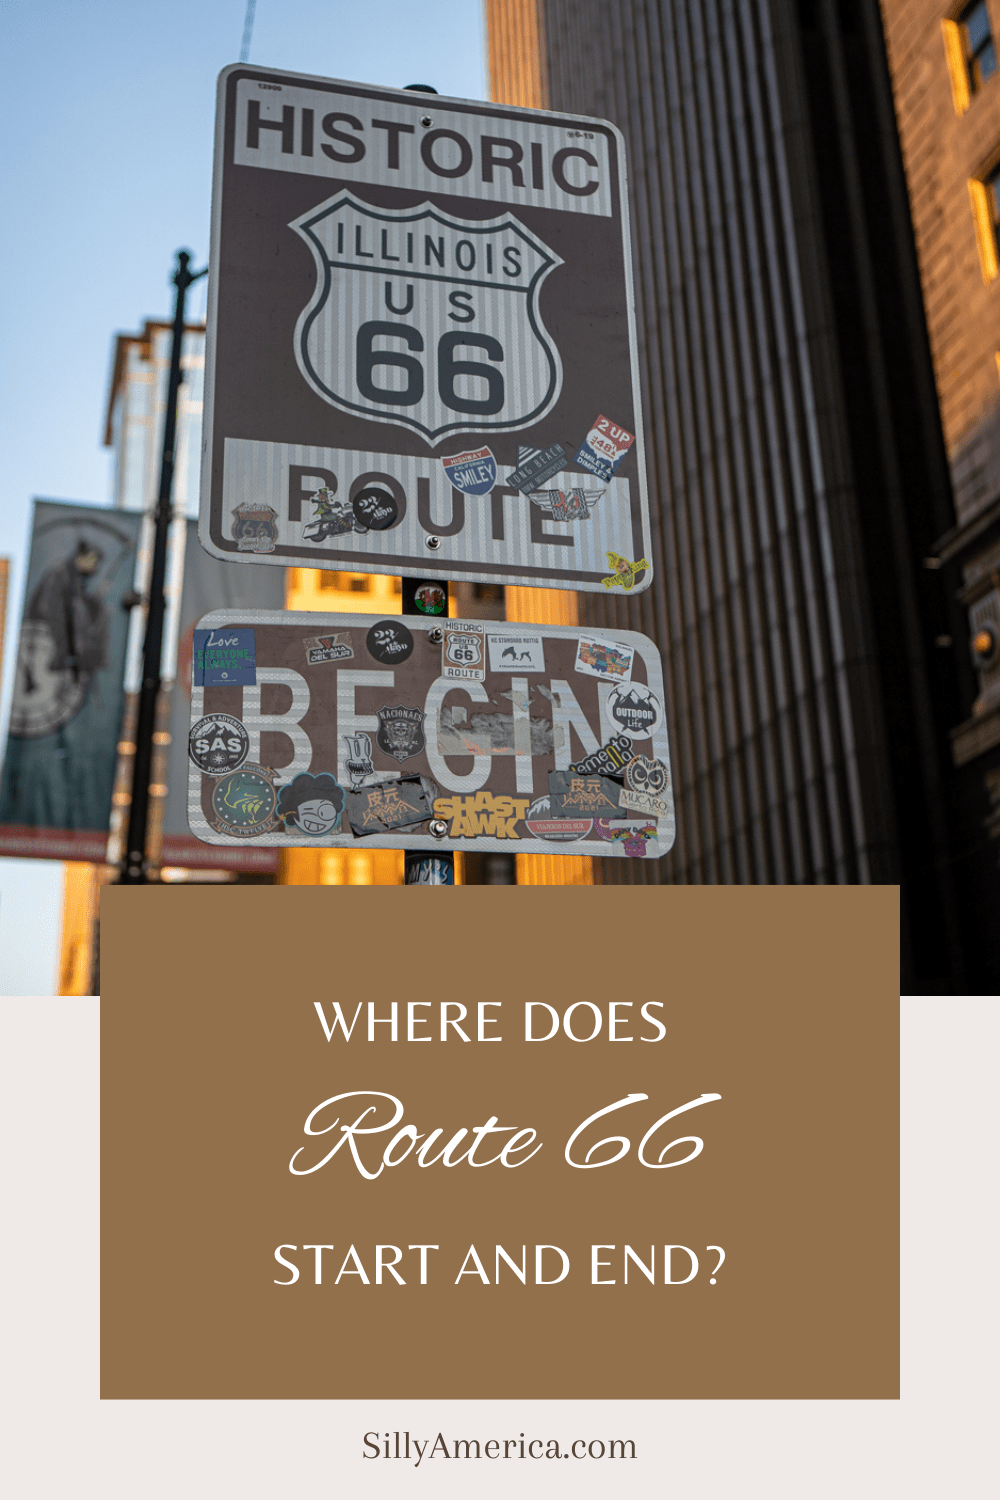 Any road trip you take will always have a beginning, middle, and end. And that includes a journey on the Mother Road. So where does Route 66 start and end? Whichever way you choose to drive, it’s a rite of passage (and quintessential Instagram photo opp) to stop at the iconic signs that mark the Route 66 start and end points. #Route66 #Route66RoadTrip